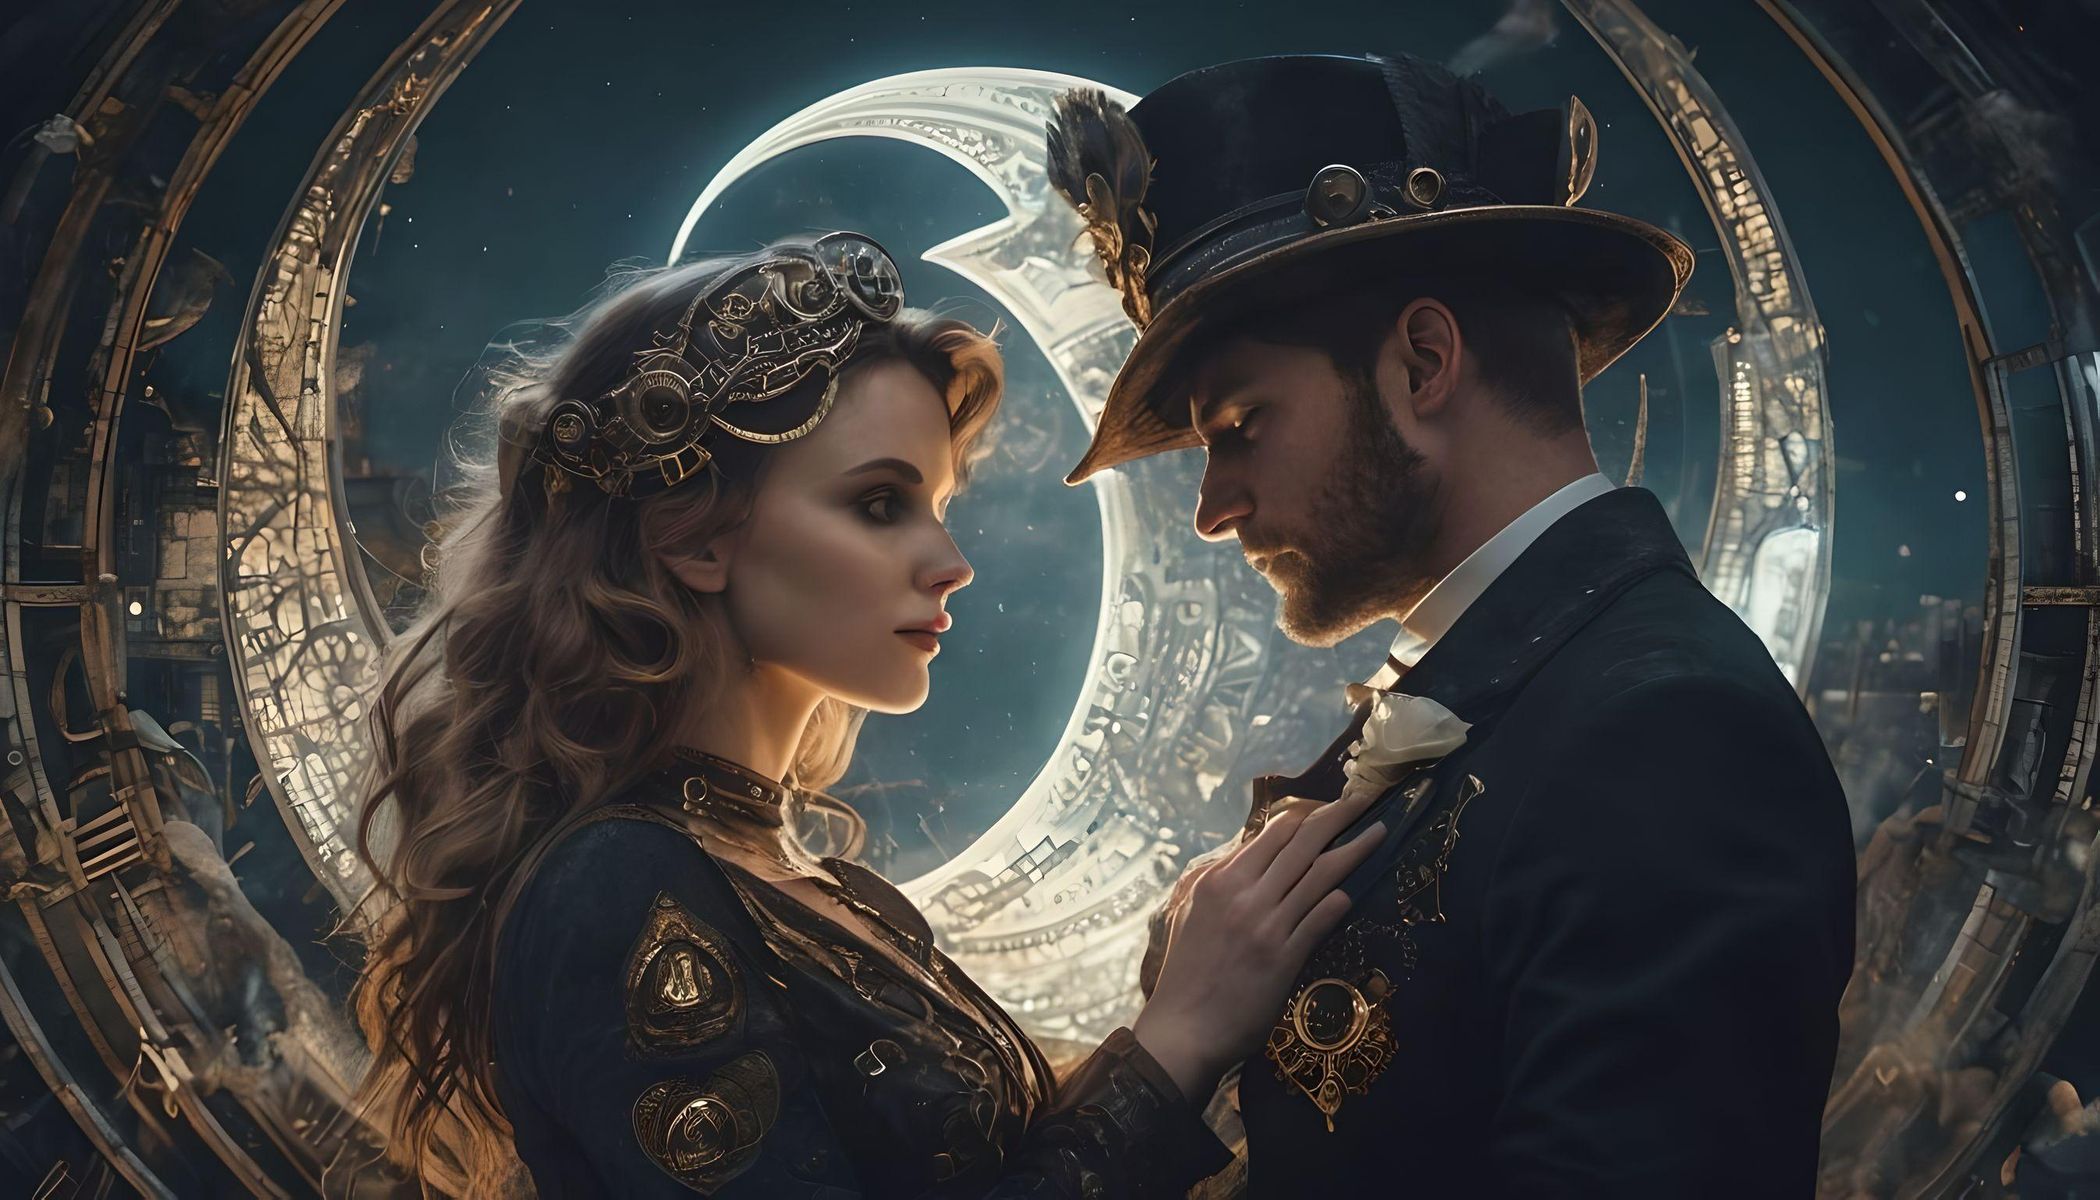 Couple with fleur de Lis symbol embracing in a retro futuristic world. (Steam punk inspired) moon on the background